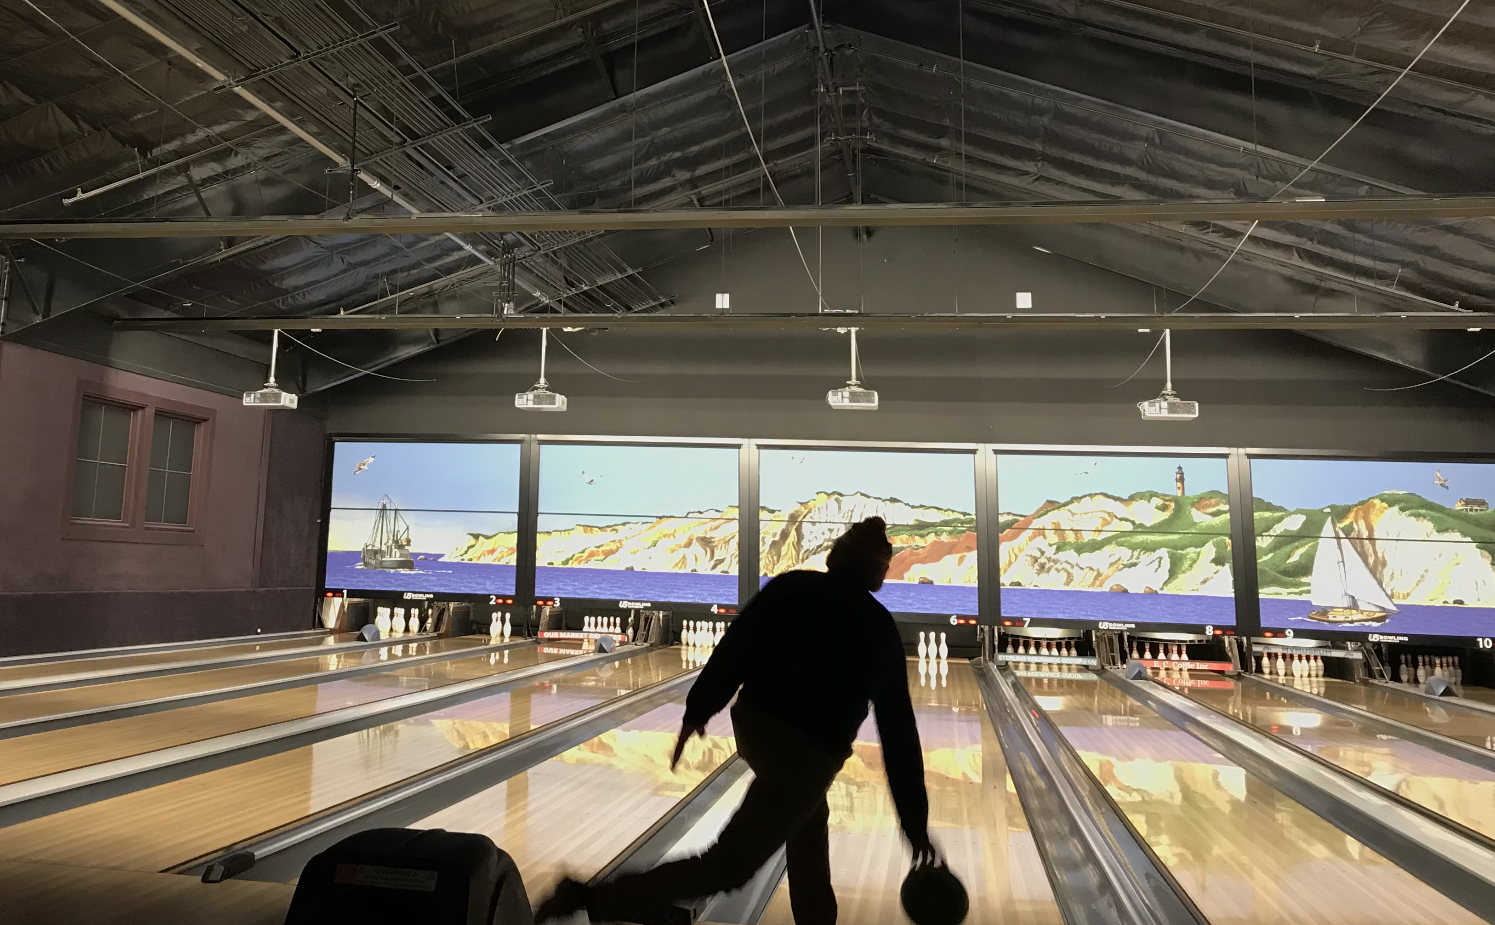 A person bowls at the lanes at the Barn Bowl and Bistro in Oak Bluffs.